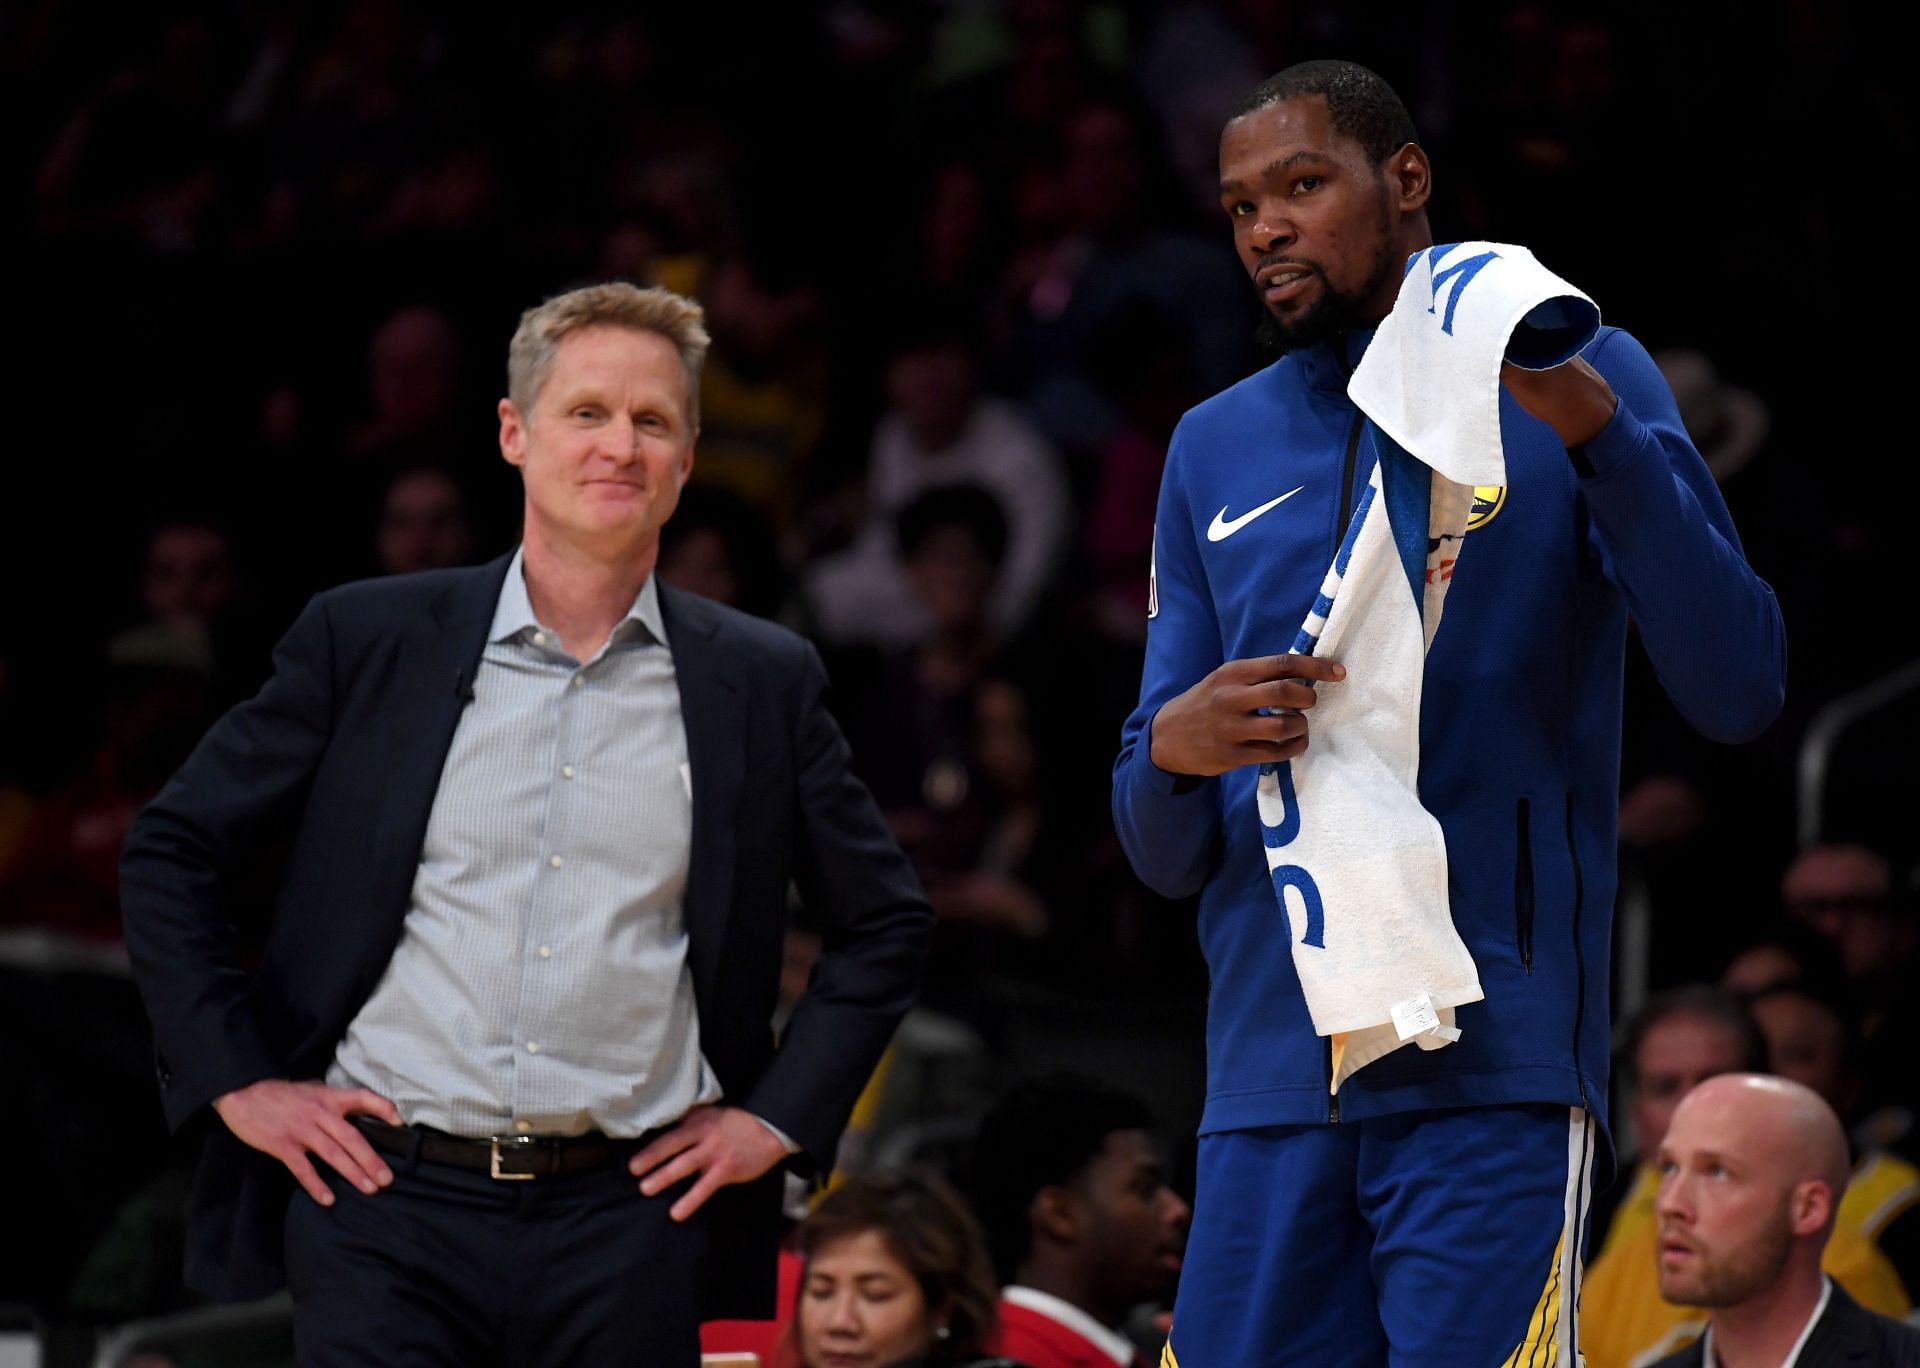 Extreme pressure to succeed drove both Steve Kerr and Kevin Durant to win back-to-back NBA titles.